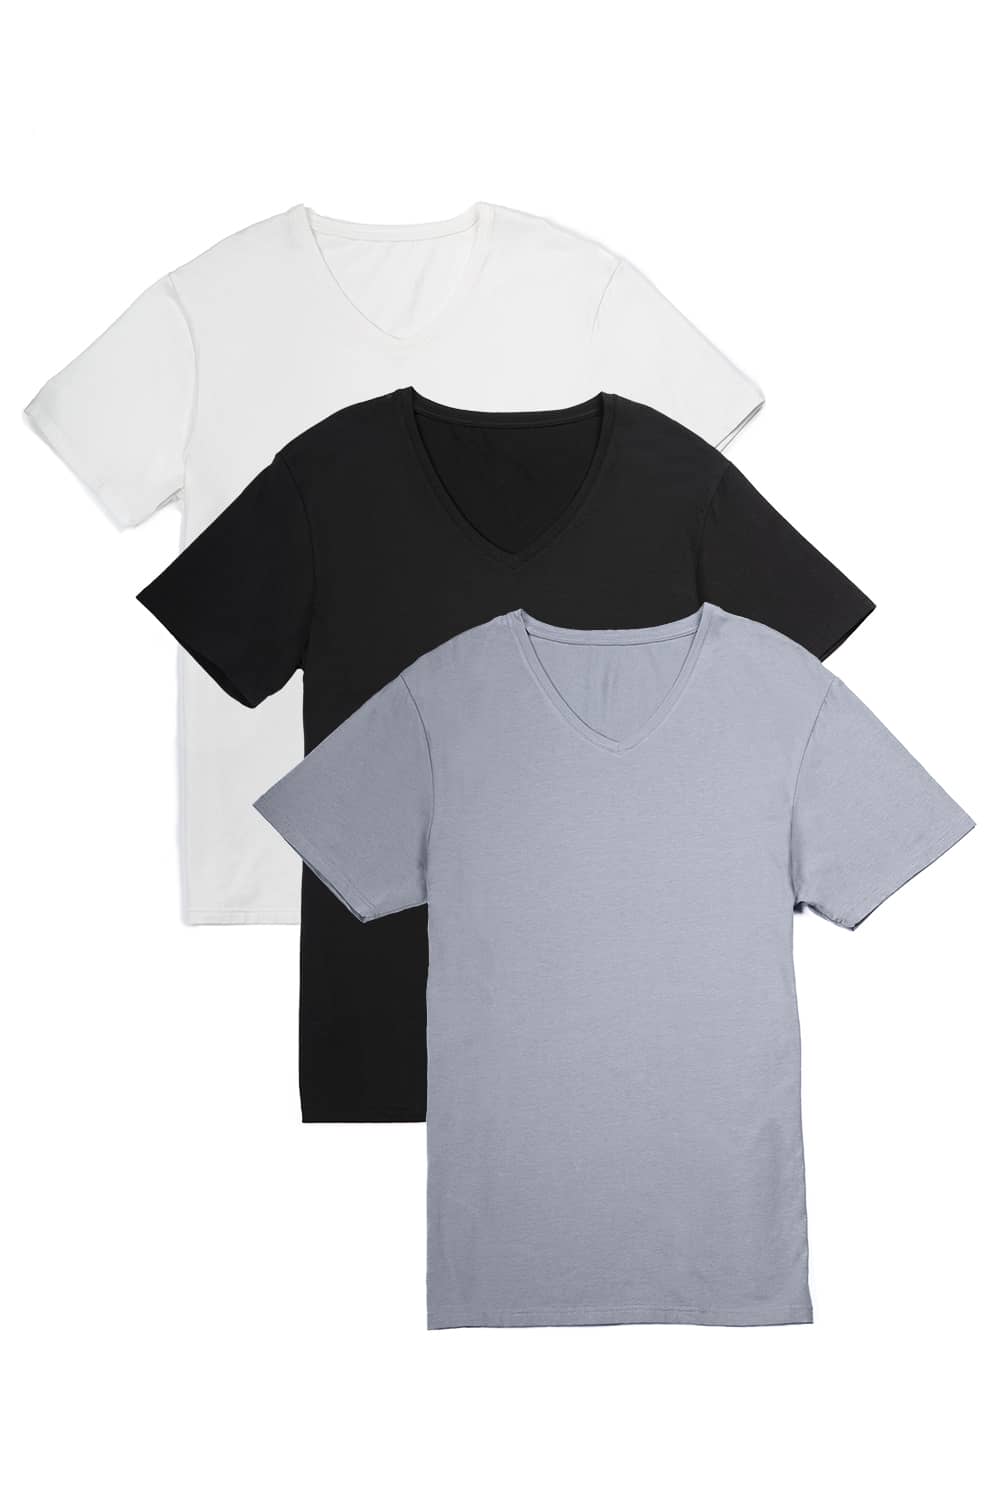 Men's Classic Fit Soft Stretch V-Neck Undershirt Mens>Casual>Tops Fishers Finery Black Gray White Small 3 Pack